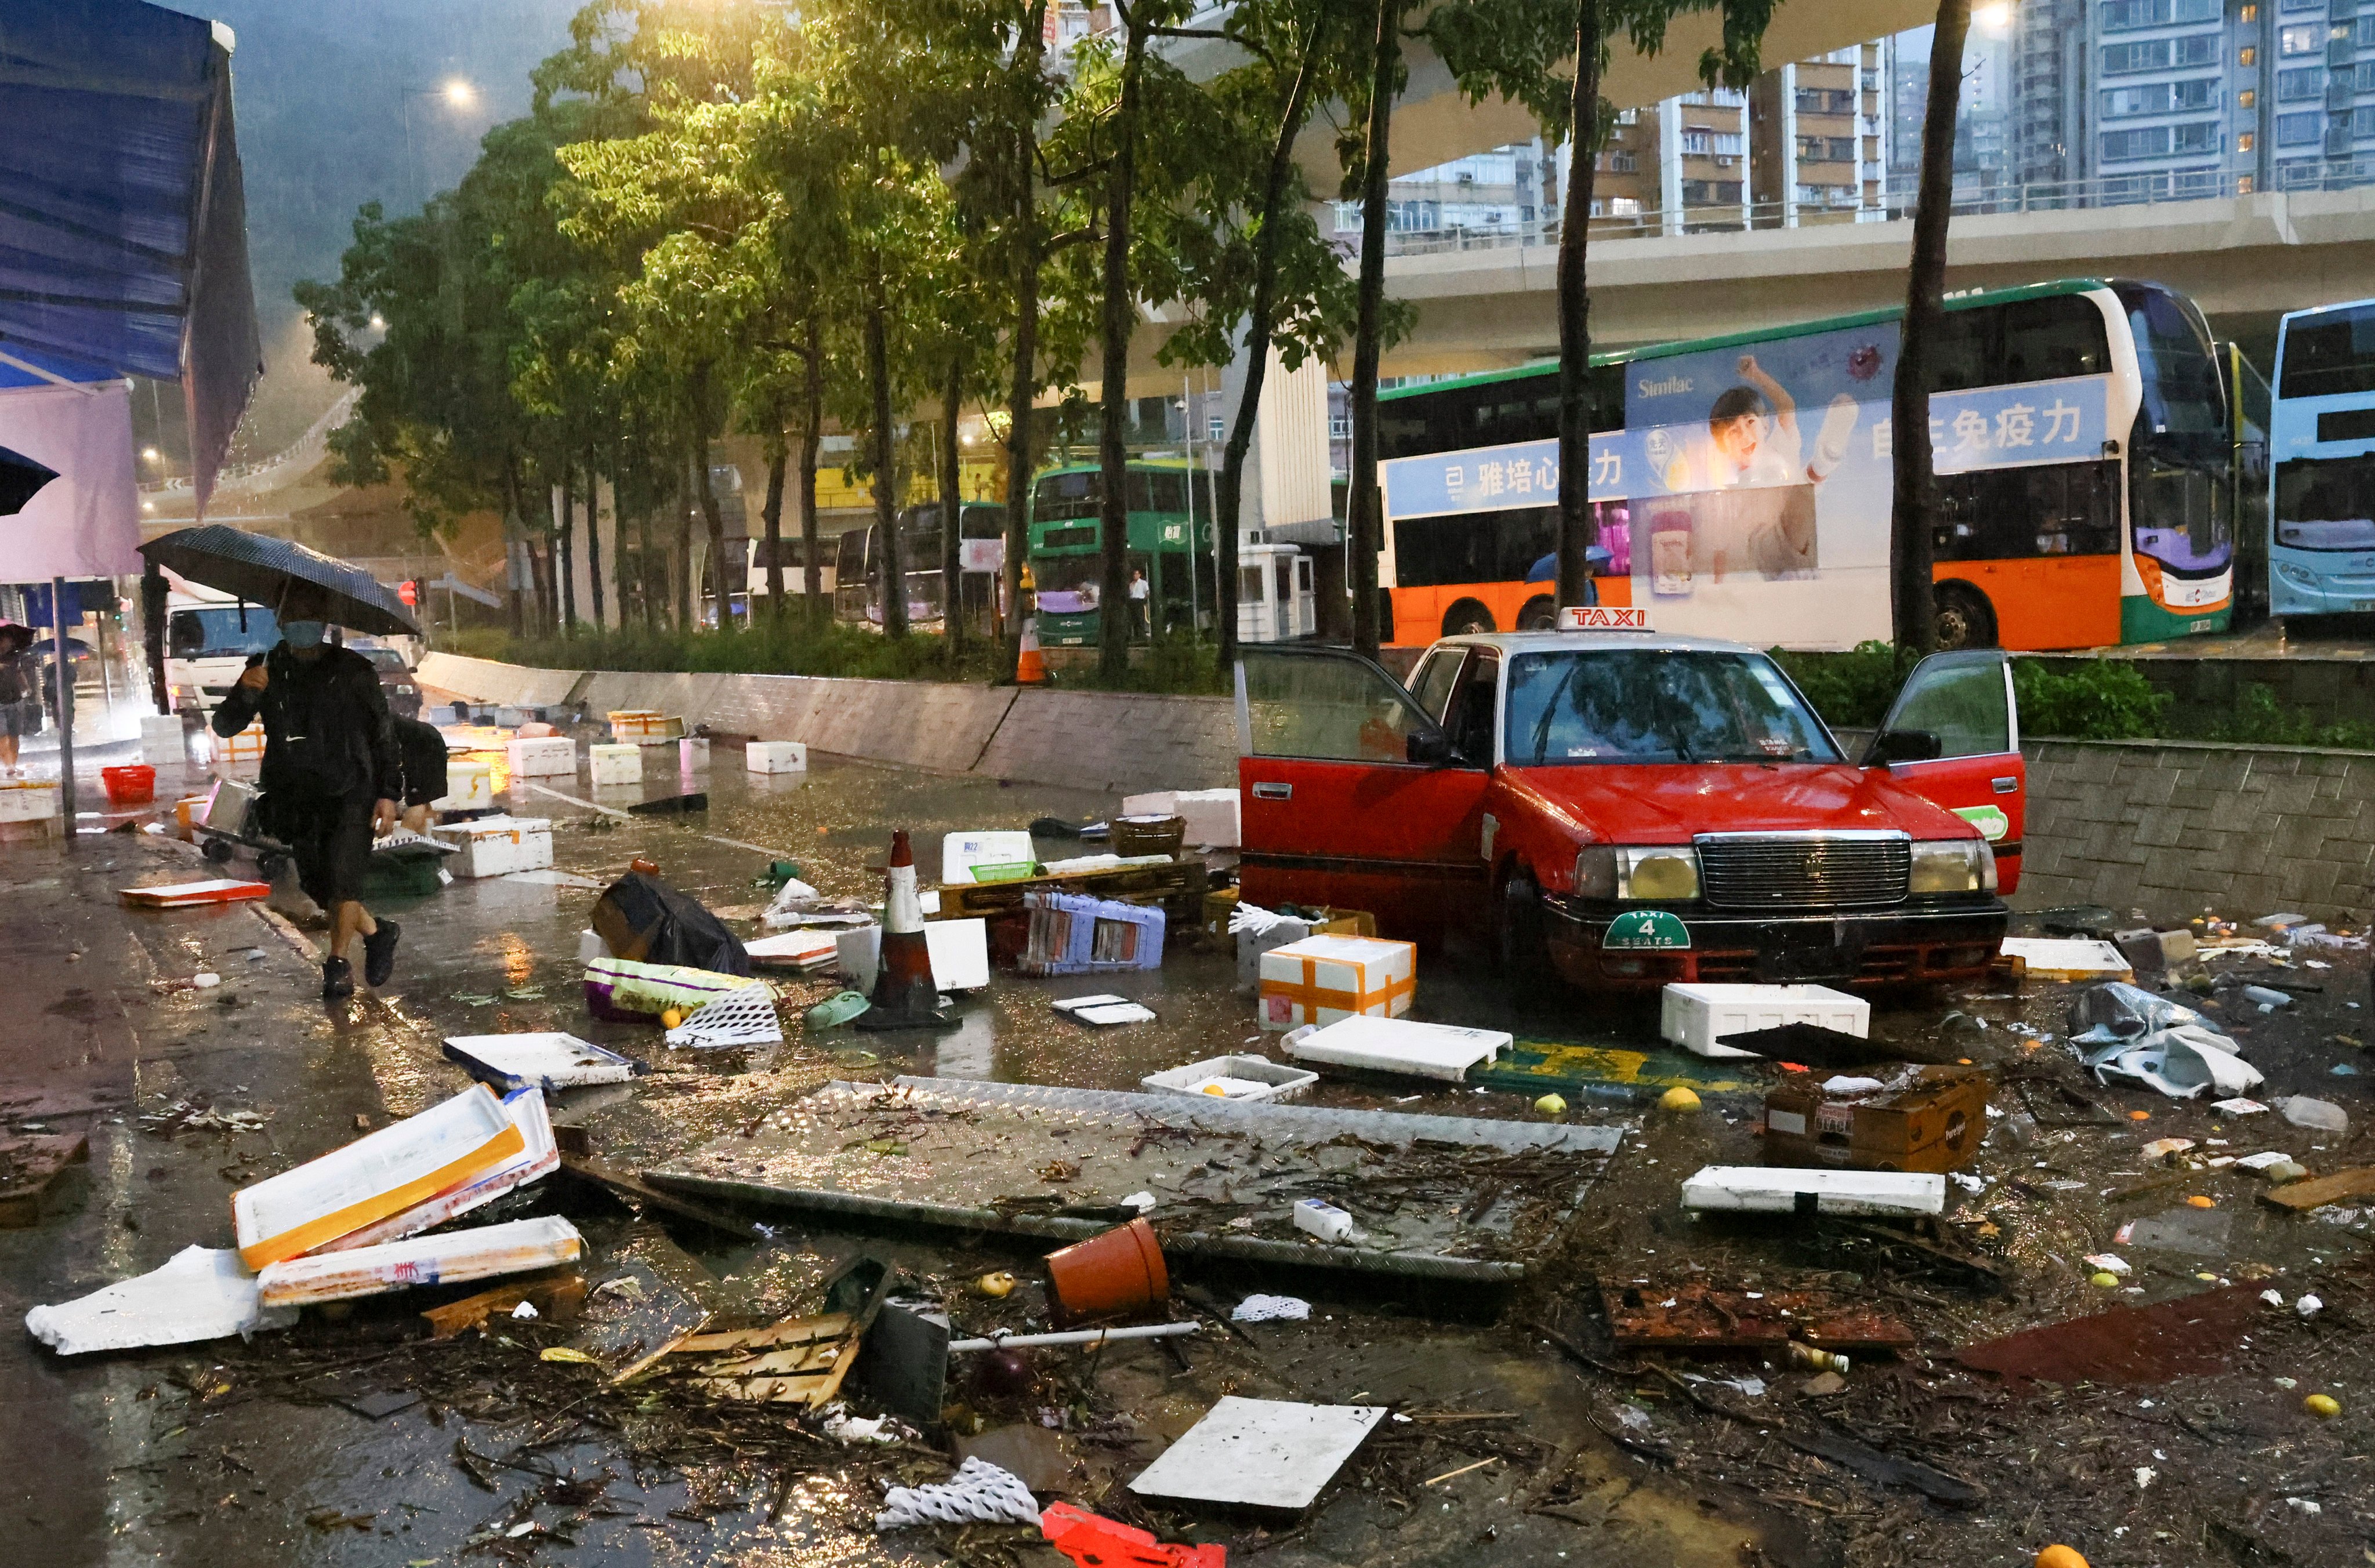 A Hong Kong road is strewn with debris, rubbish and an abandoned taxi as floodwaters recede. Photo: Dickson Lee